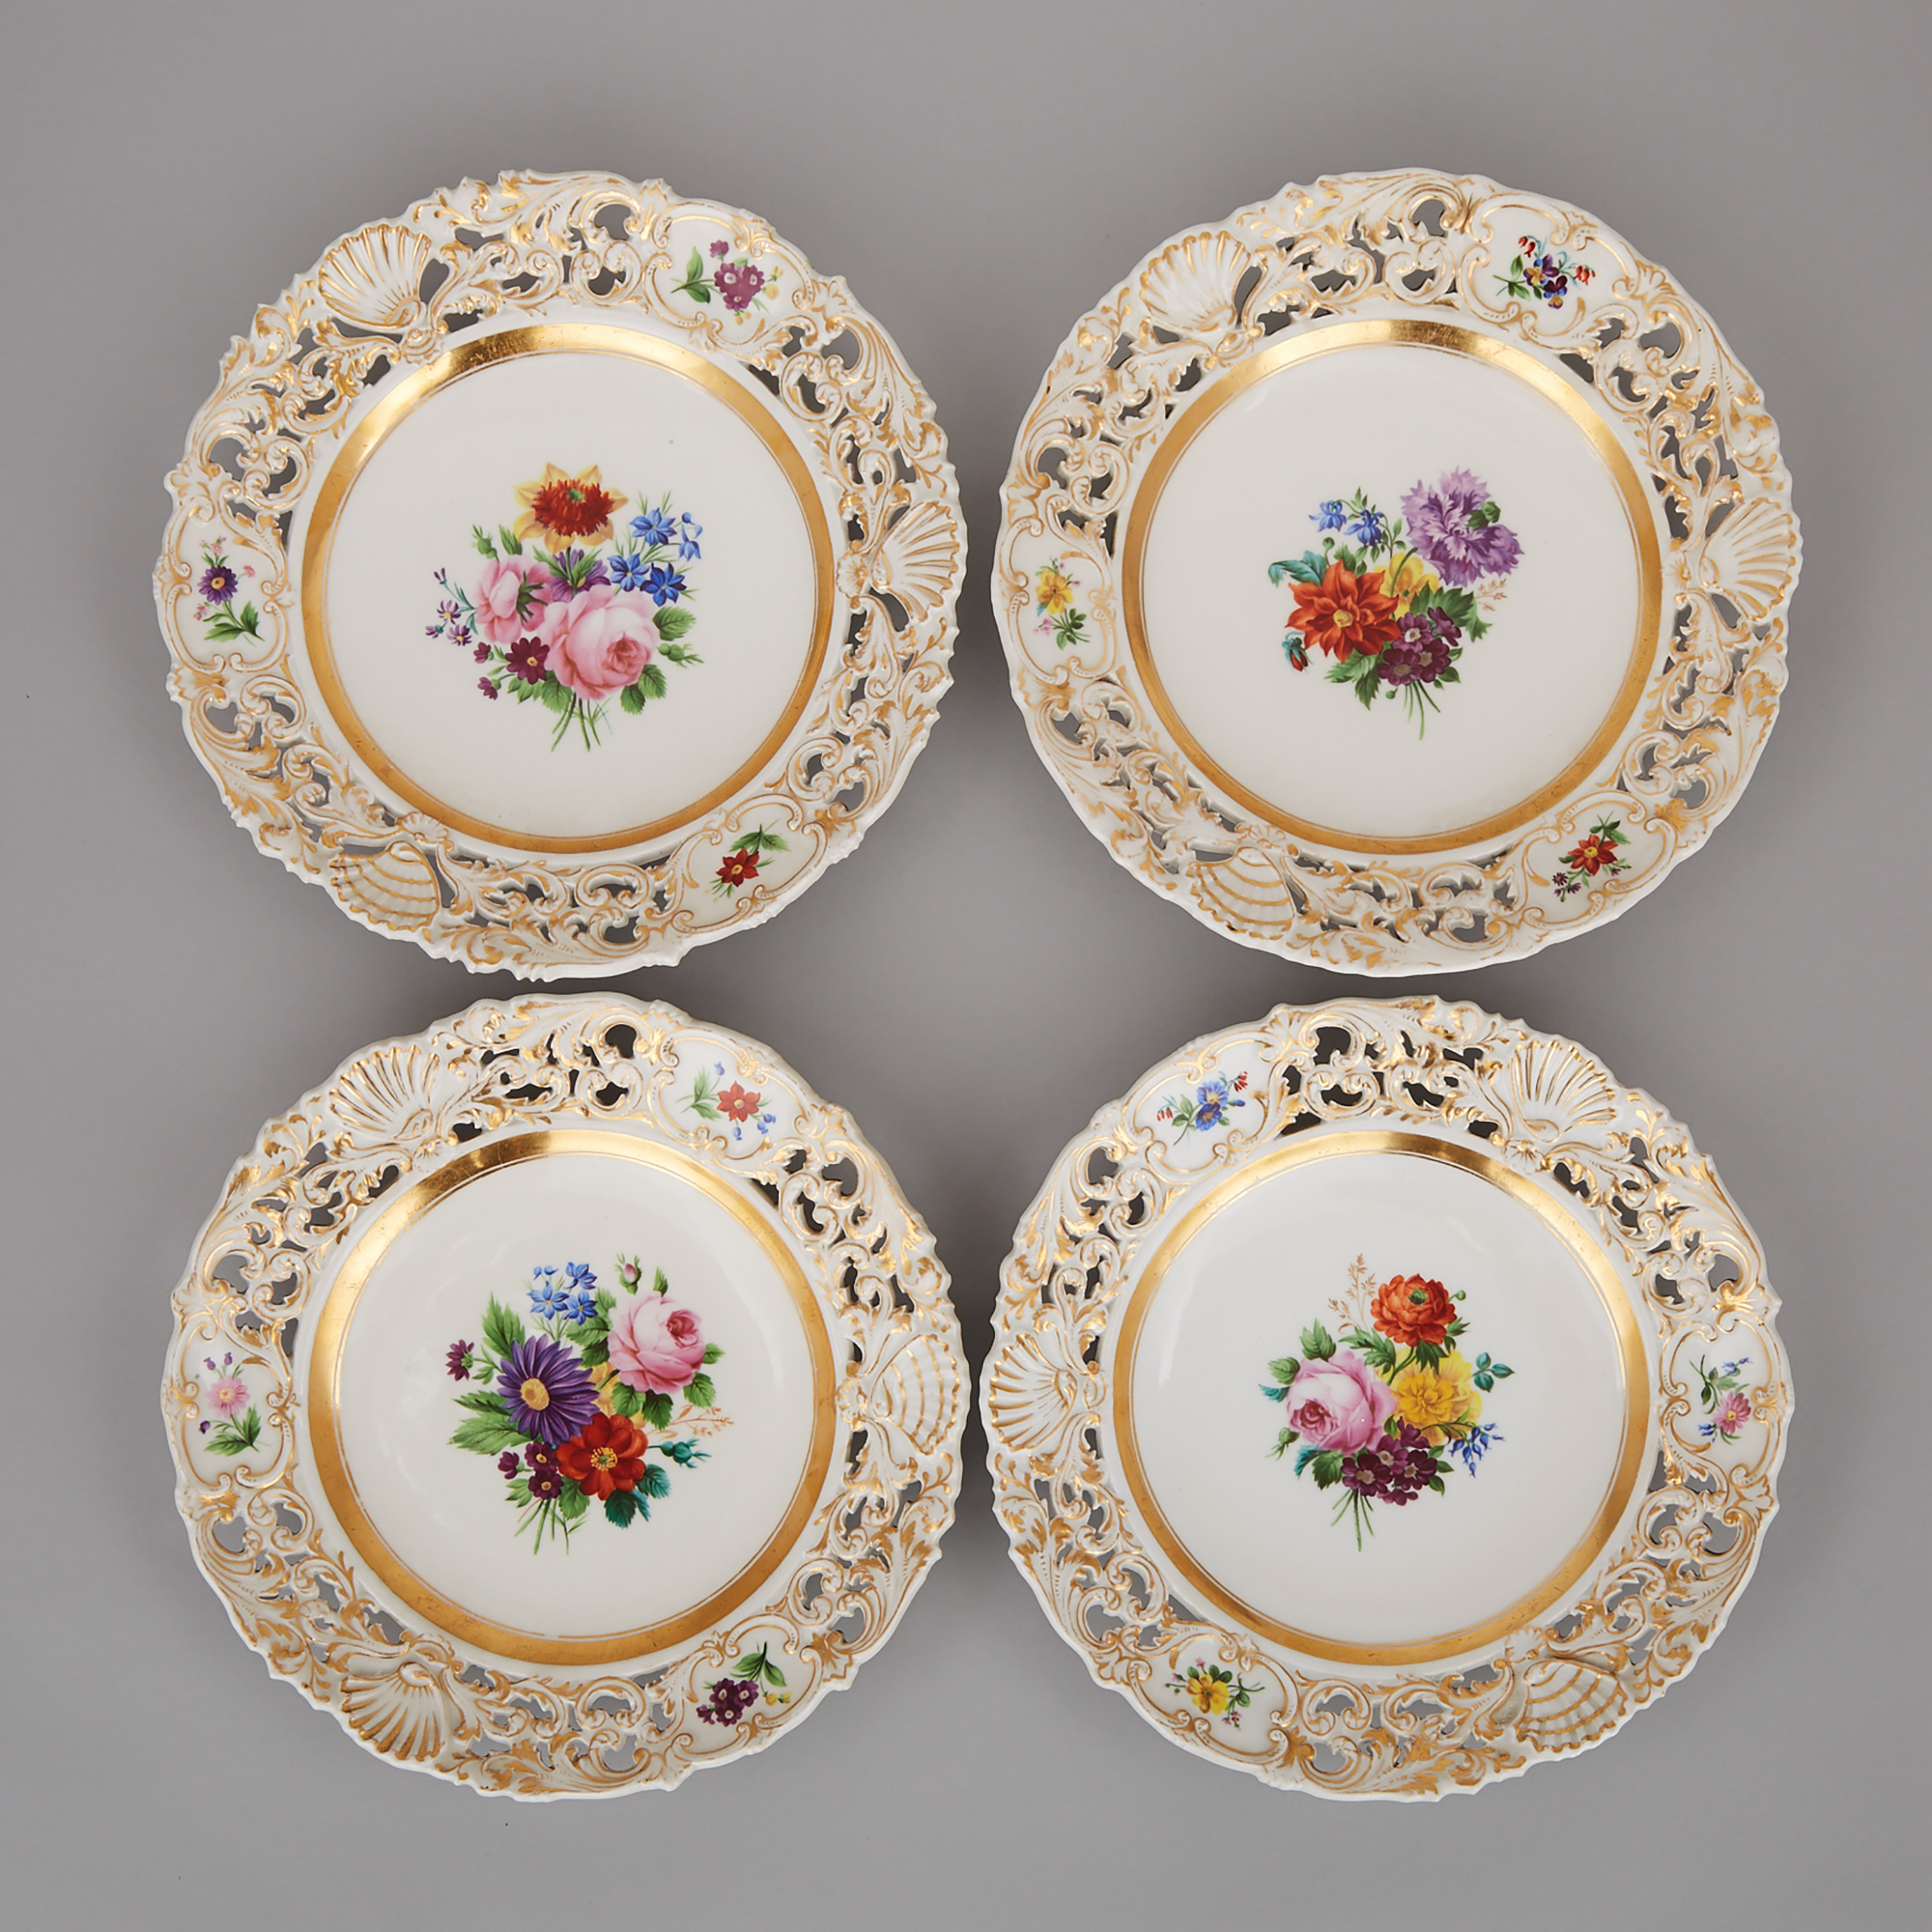 Four Vienna Flower-Painted and Gilt Reticulated Plates, 19th century